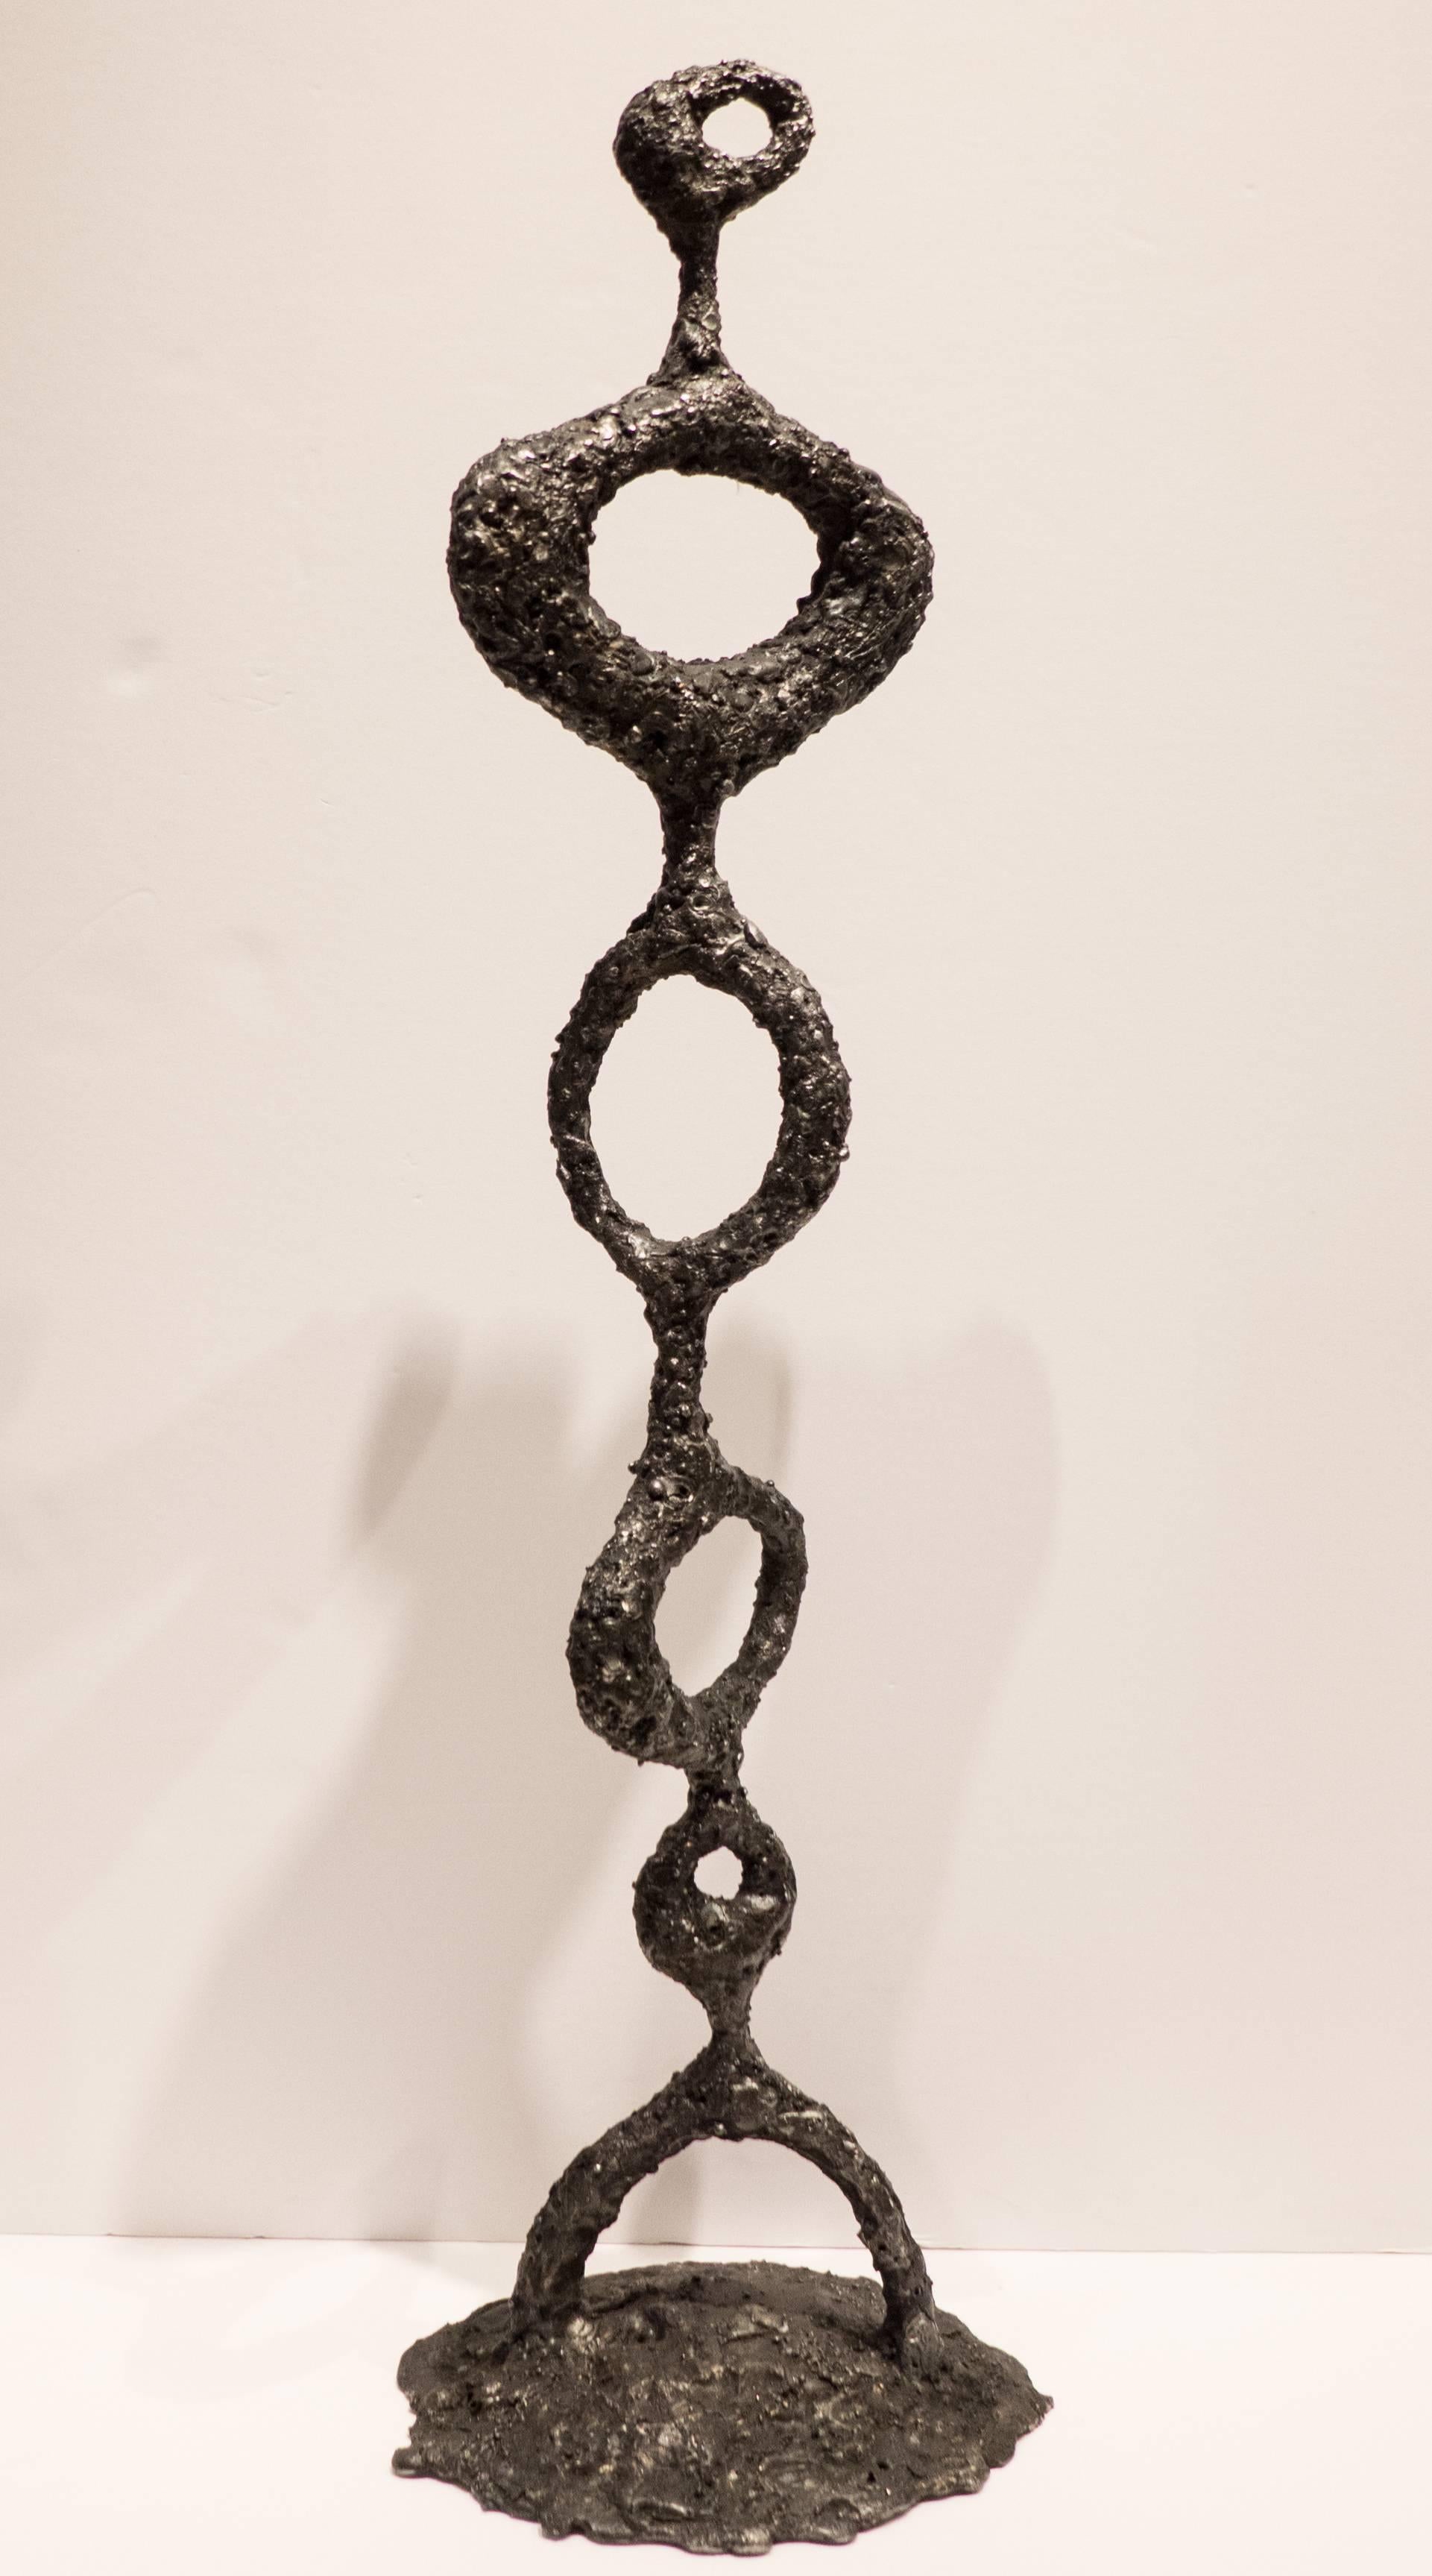 Brutalist sculpture of blackened and textured steel, by Des Moines, Iowa artist James Bearden. A new work from his Assemblage series. Bearden's work was featured recently in a solo exhibition at the NY Design Center titled 